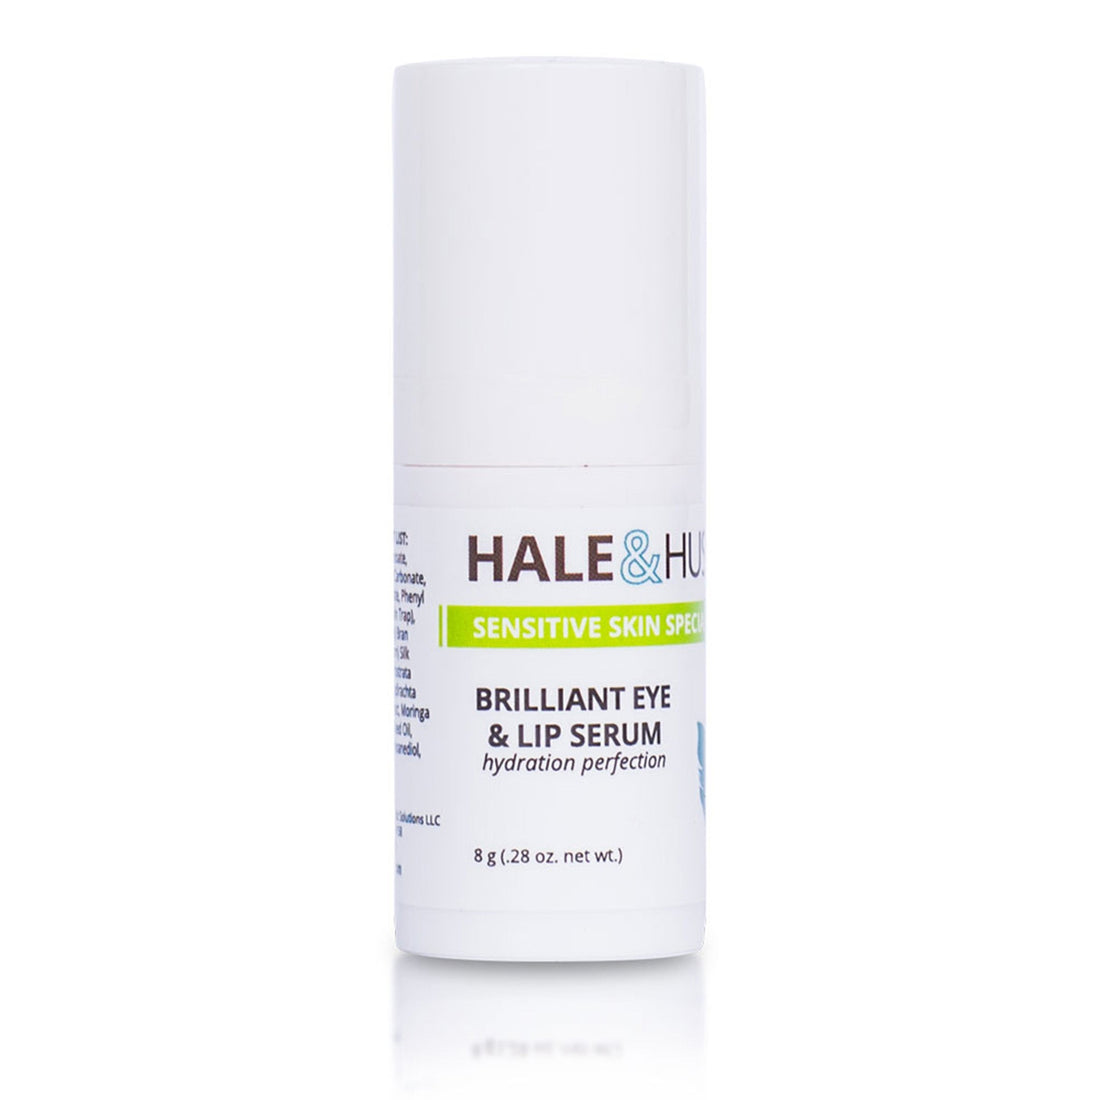 Brilliant Eye &amp; Lip Serum softens and conditions skin around the eyes and lips